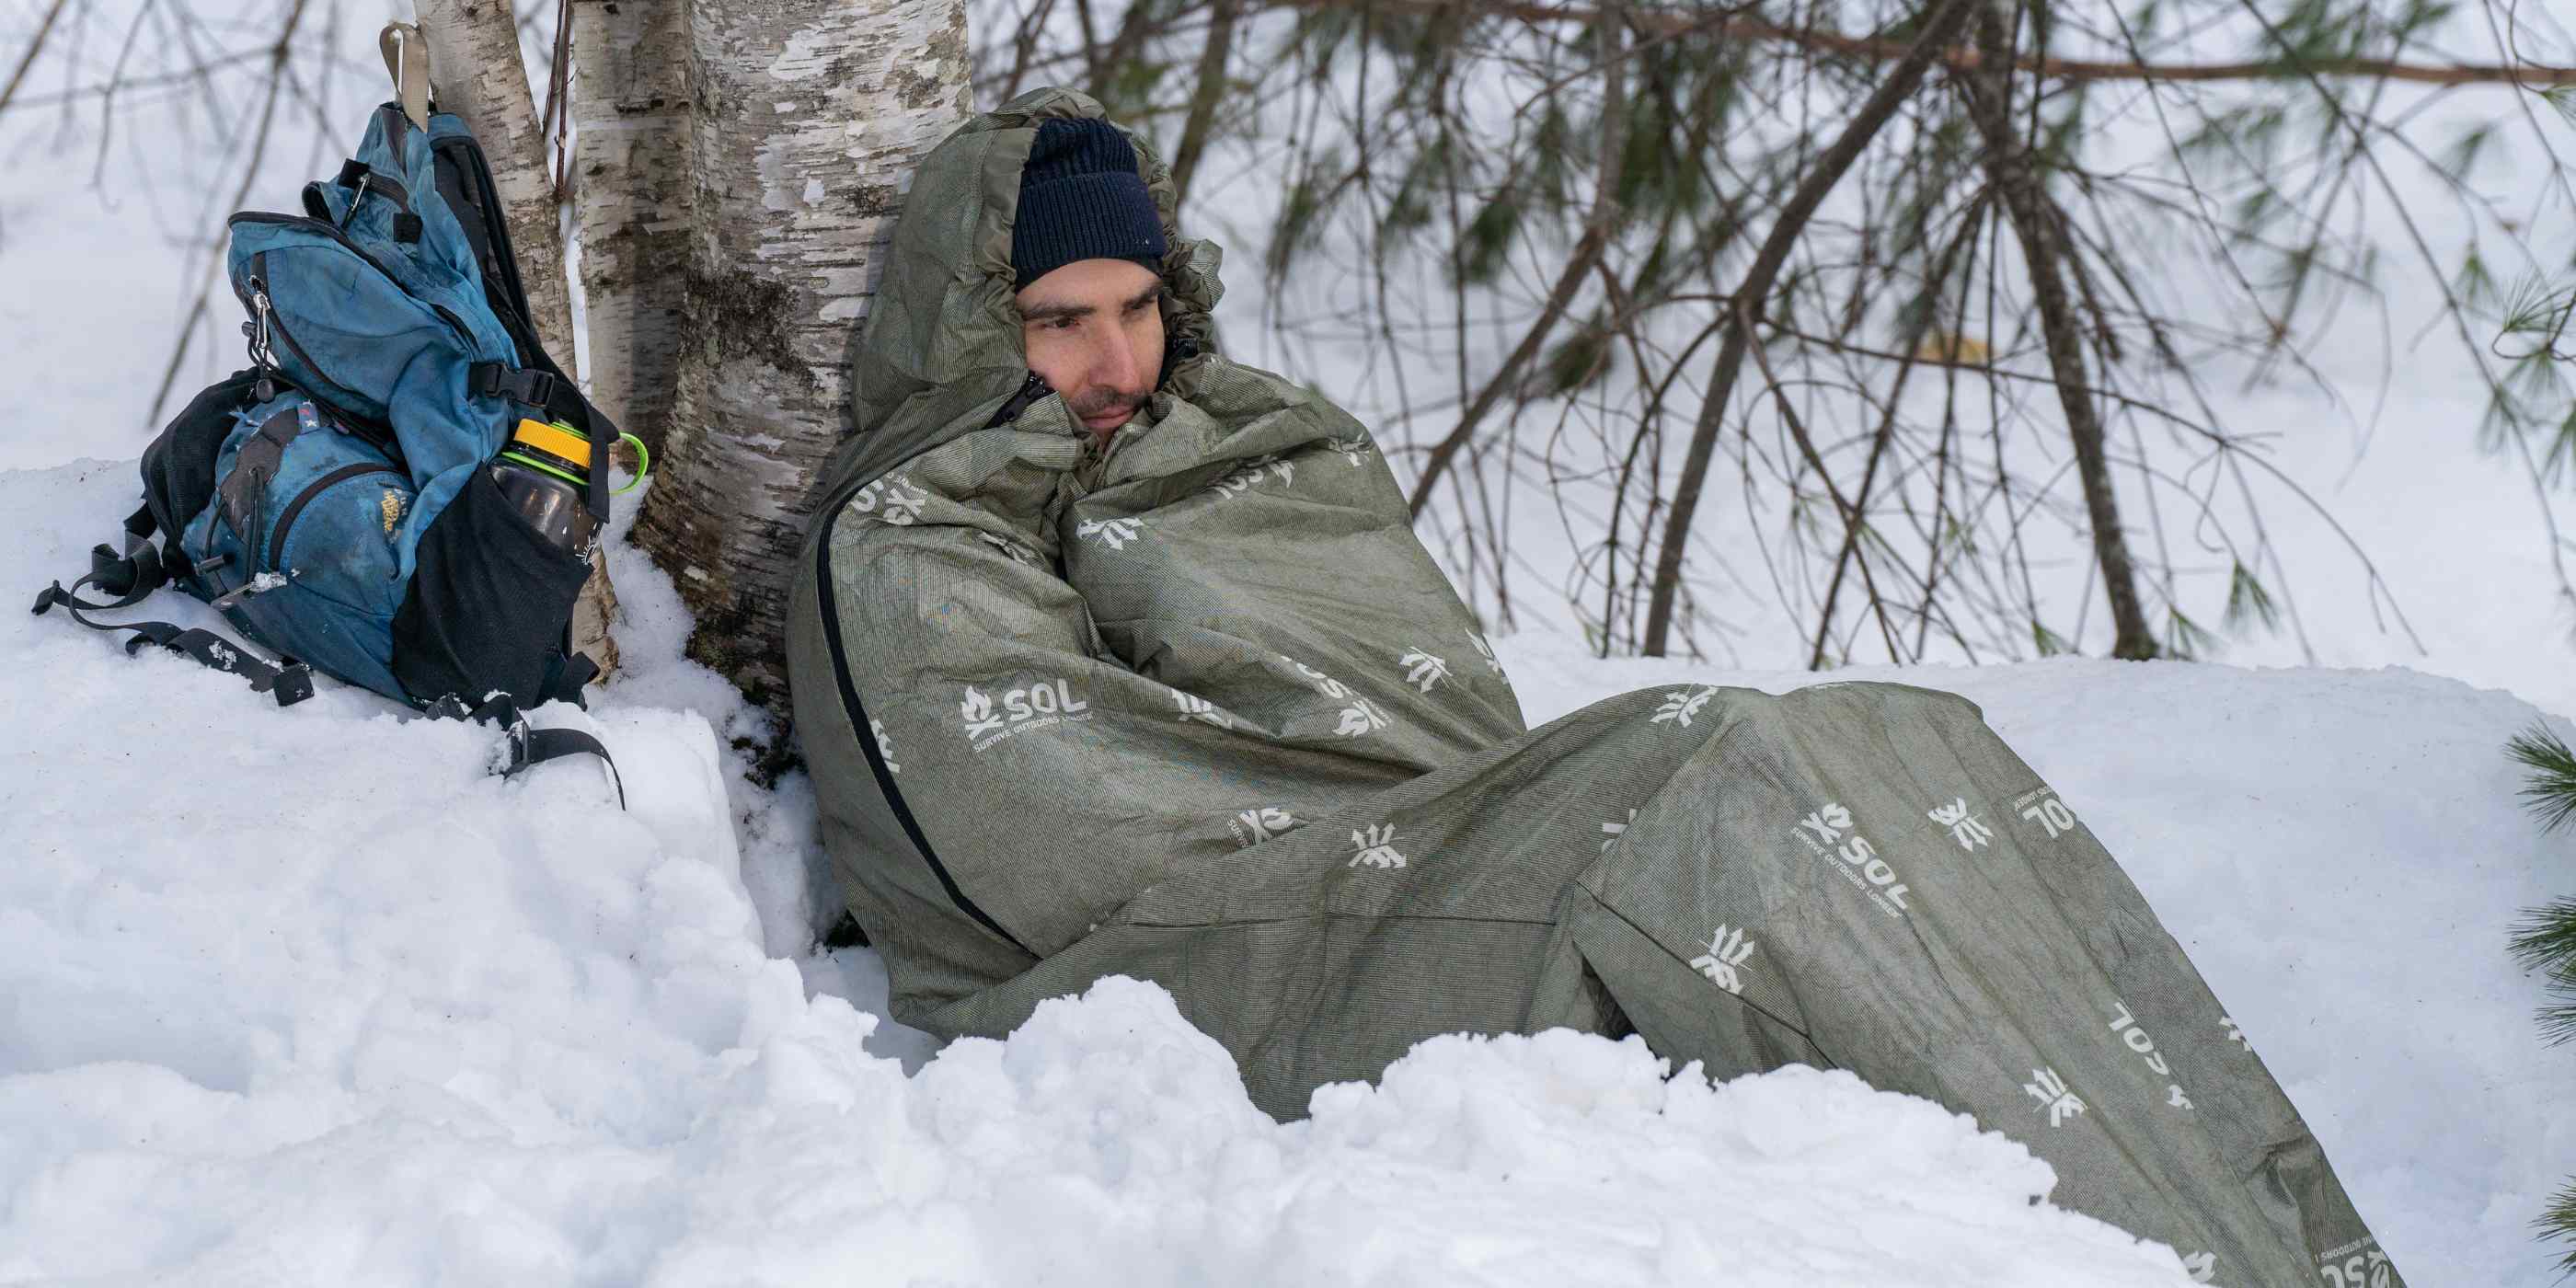 Man Sitting on Snow Leaning on Tree in OD Green SOL Escape Bivvy with Blue Backpack Behind Him